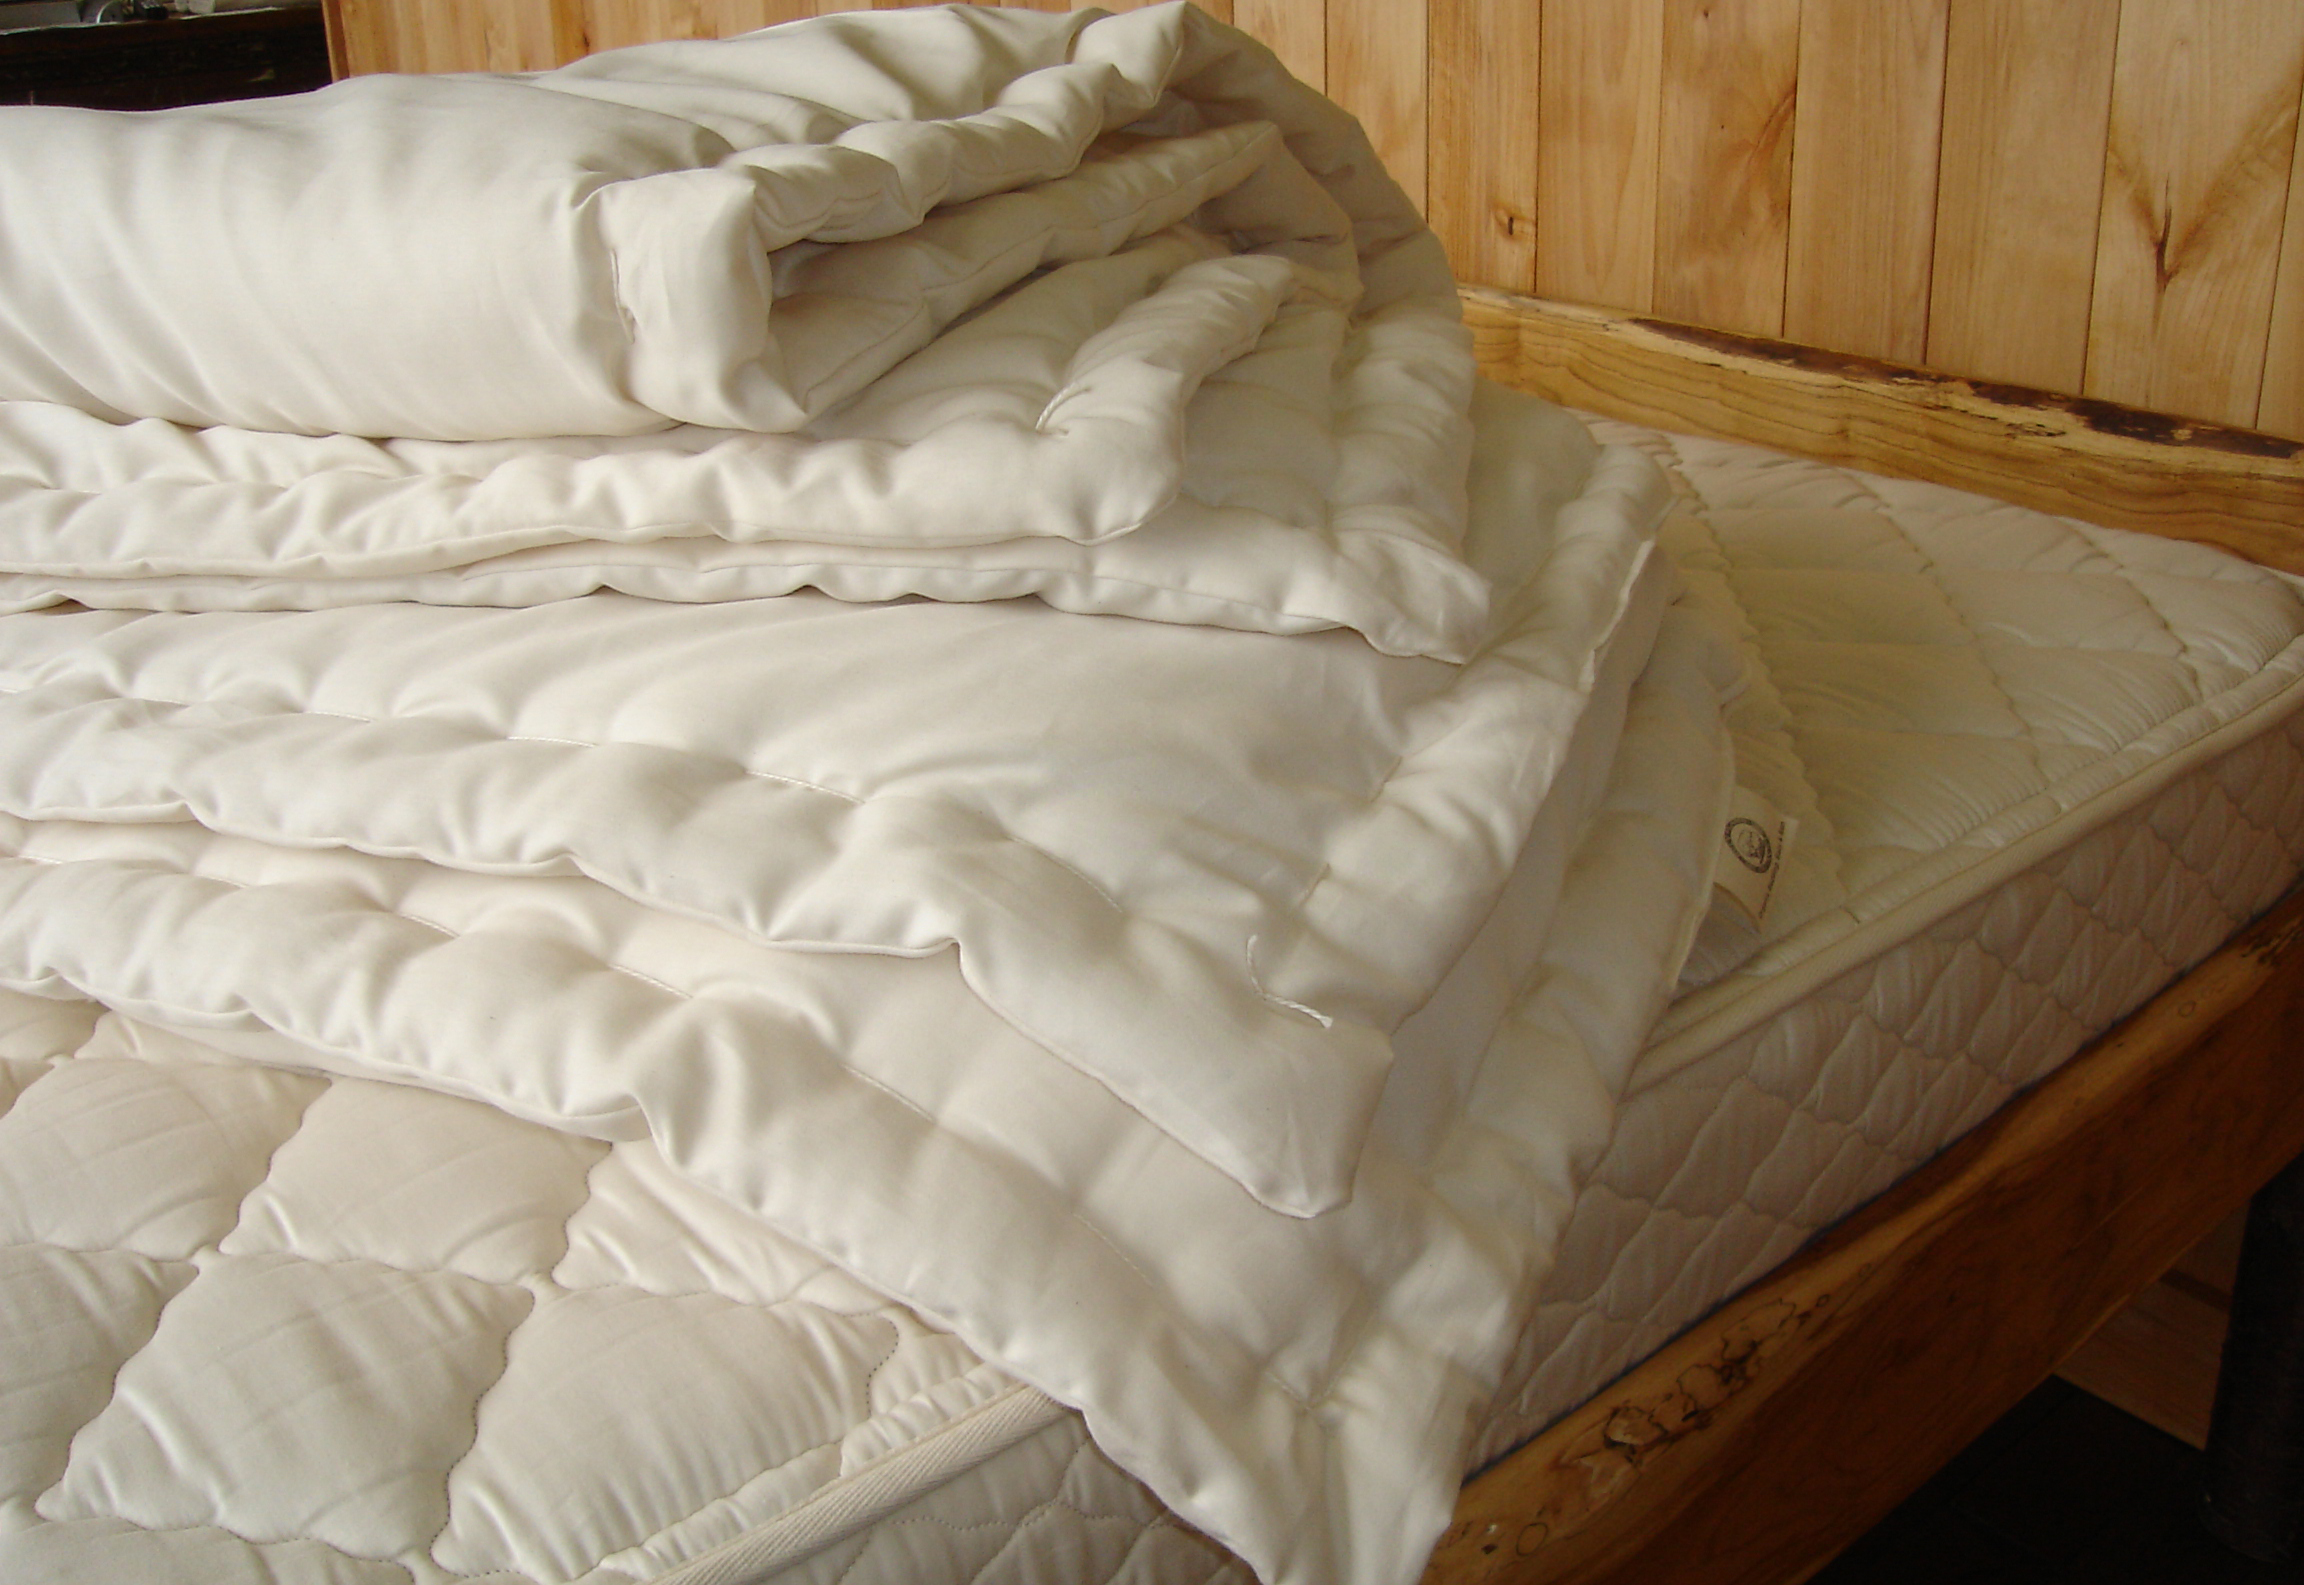 All-Natural Wool Comforter